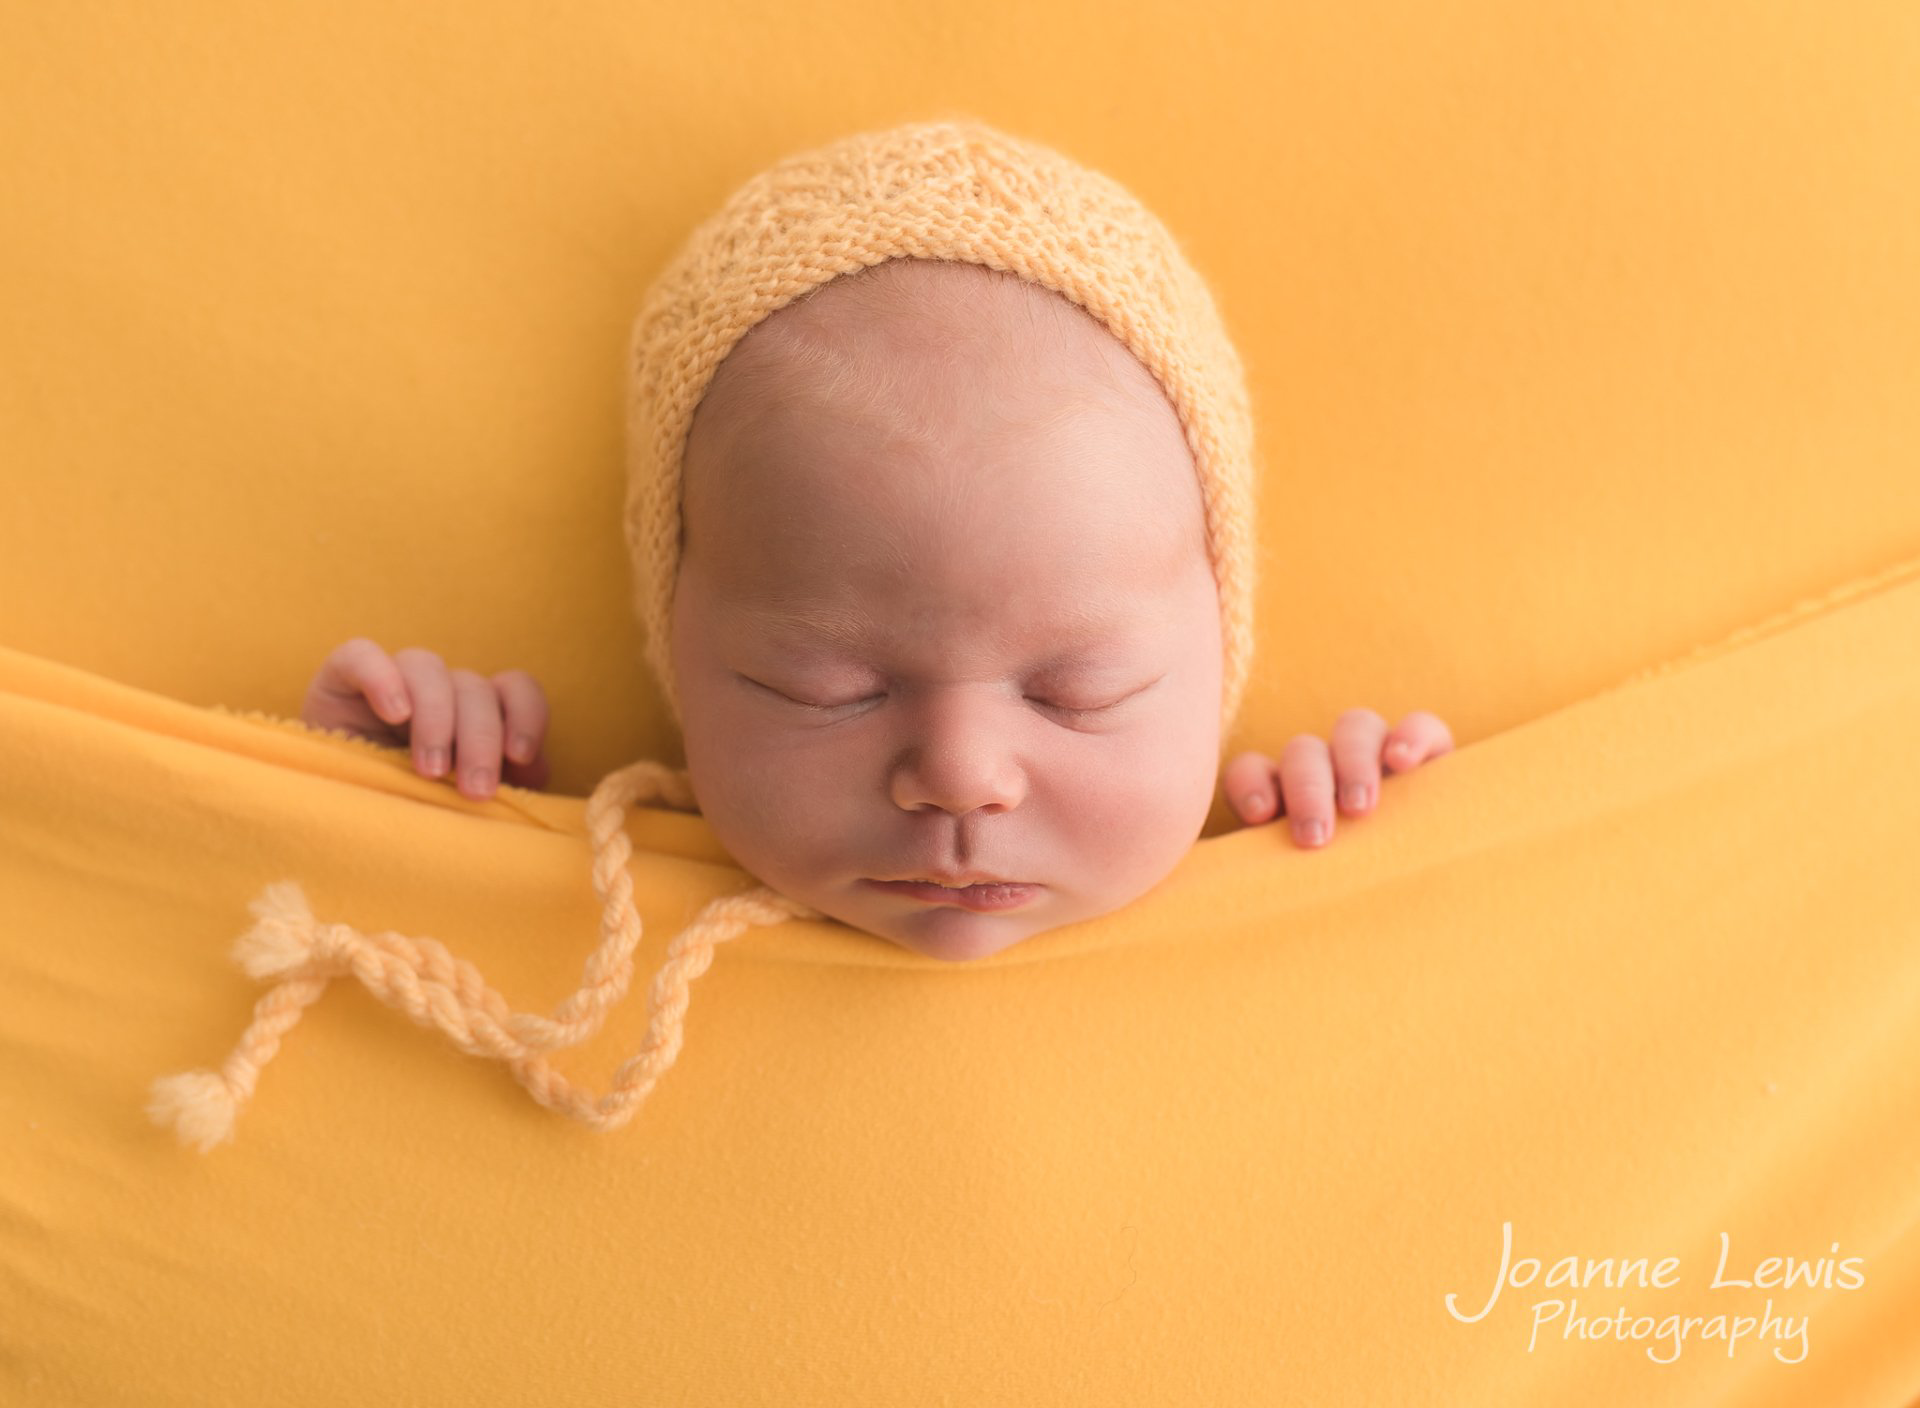 Newborn baby photoshoot. Asleep in a yellow bed style blanket